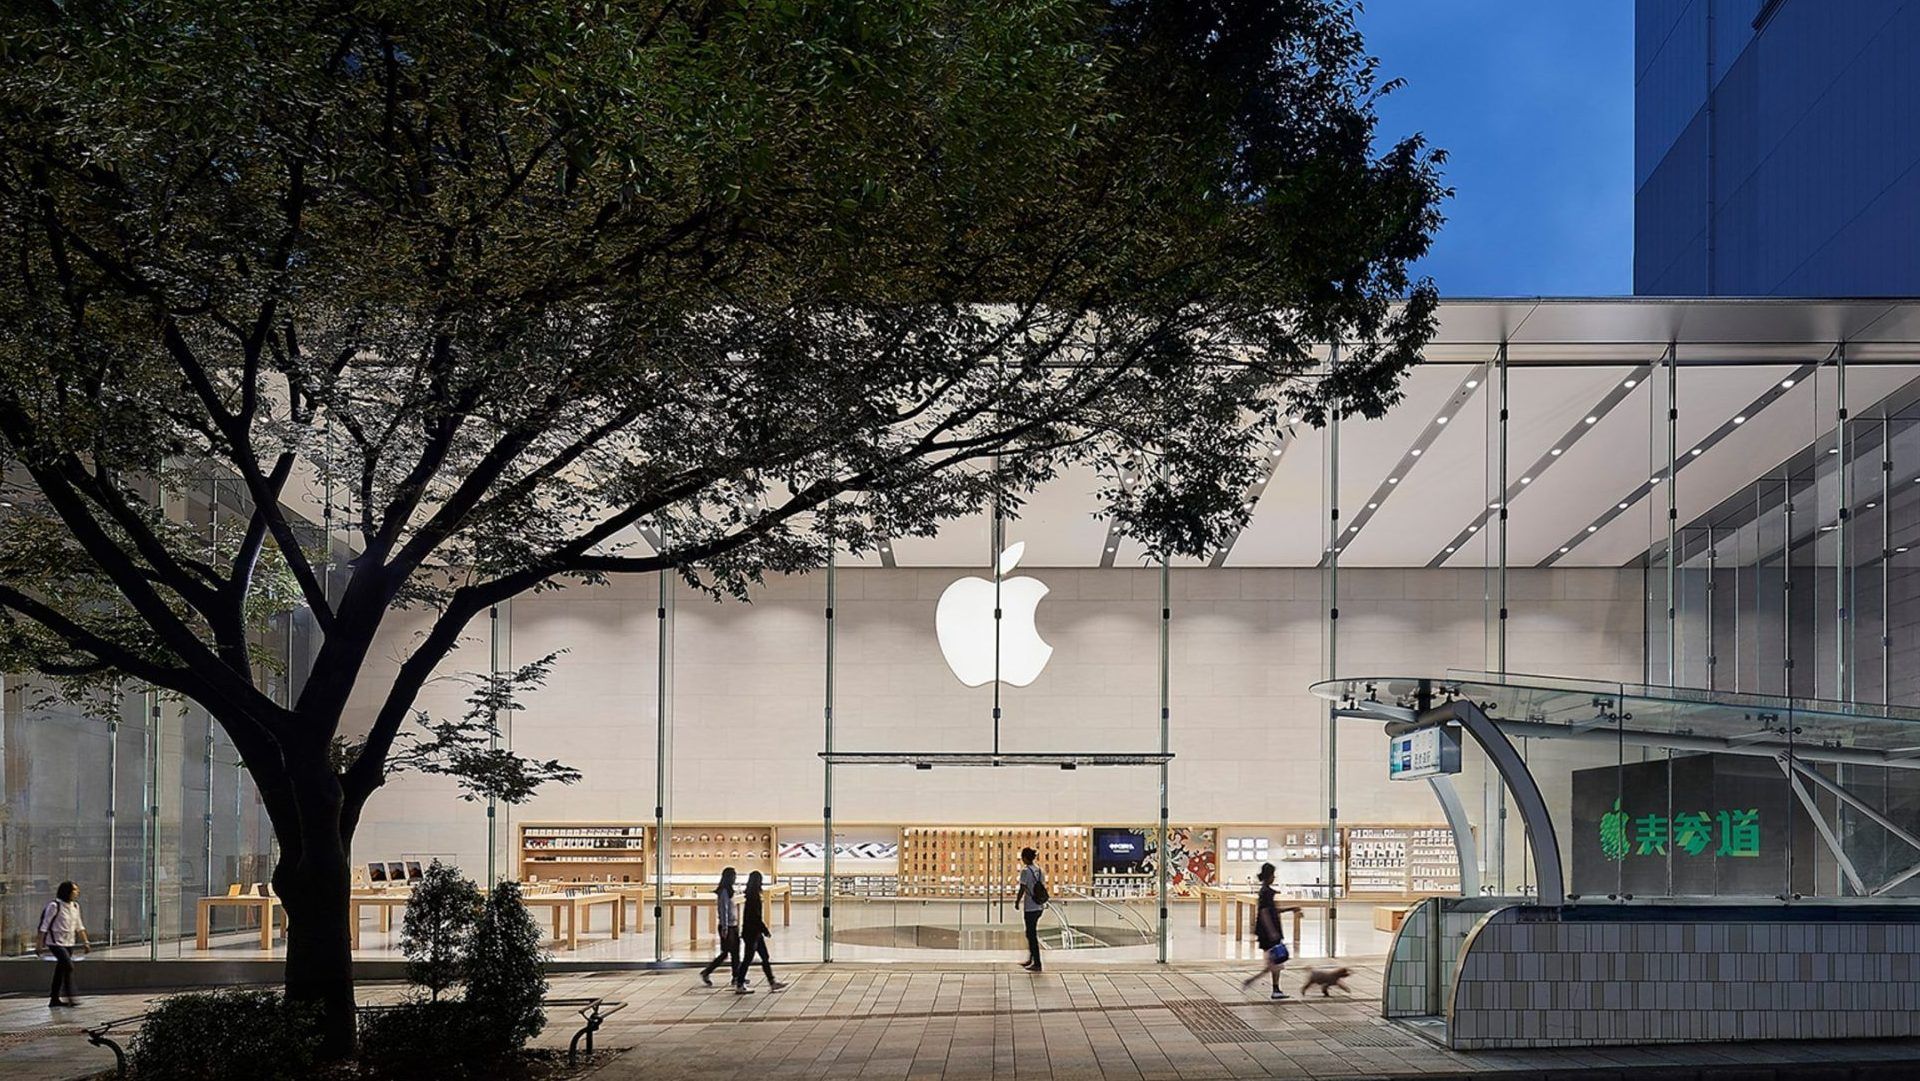 In Singapore the first floating Apple Store: A transparent glass dome